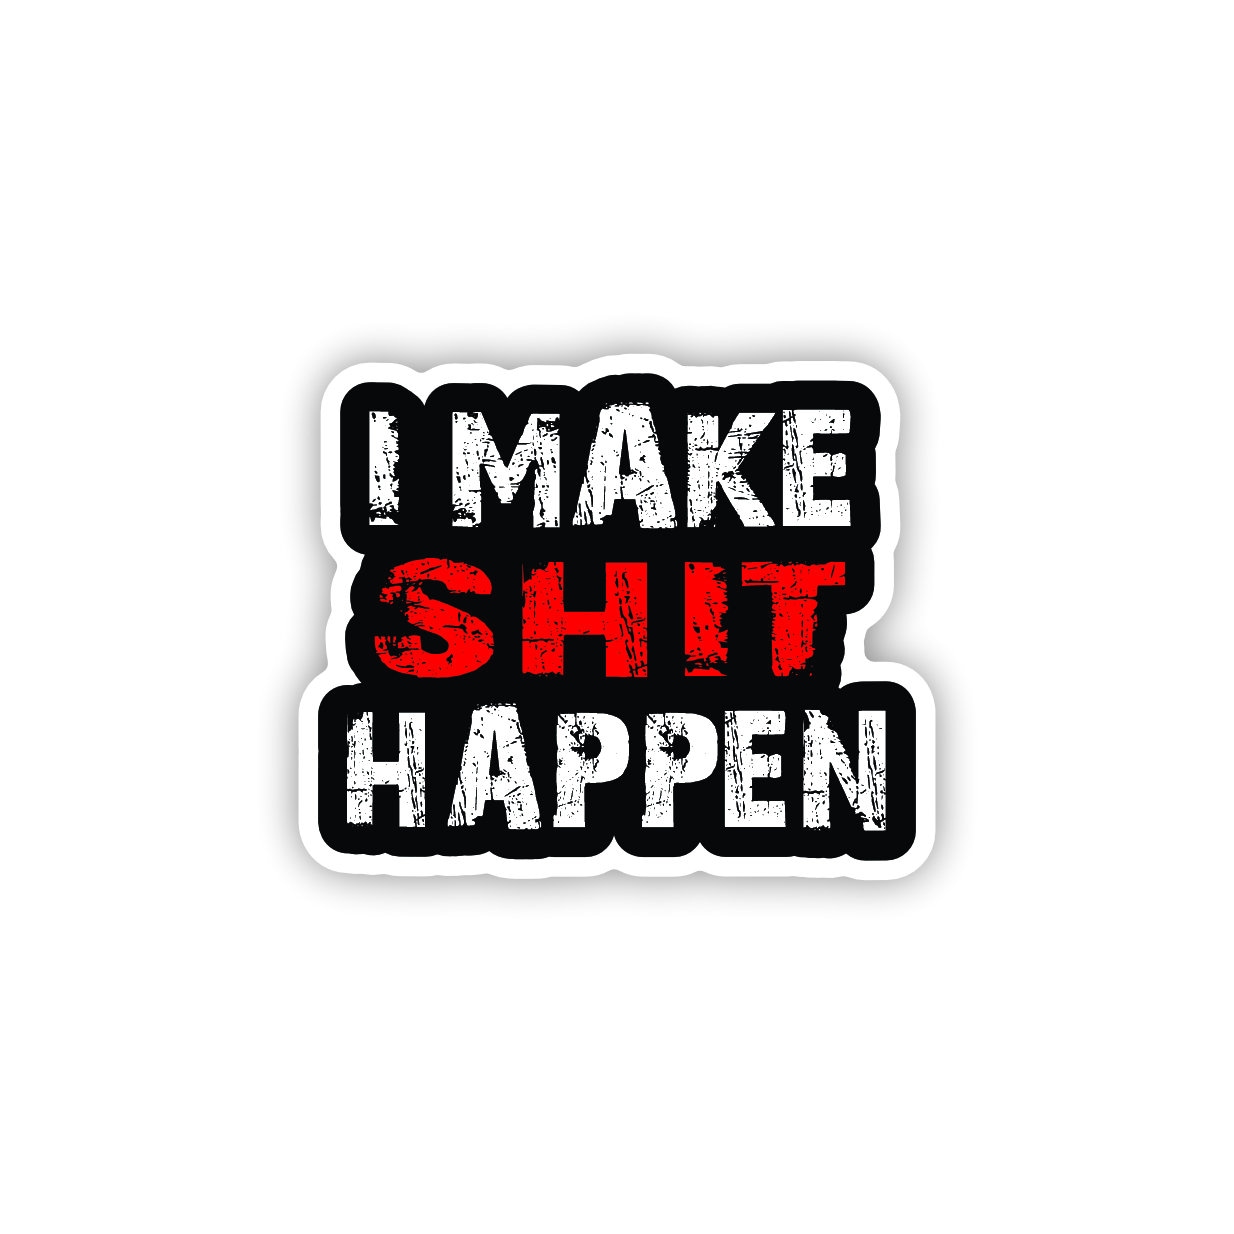 Shit Happens Sticker 200mm quality water & fade proof vinyl